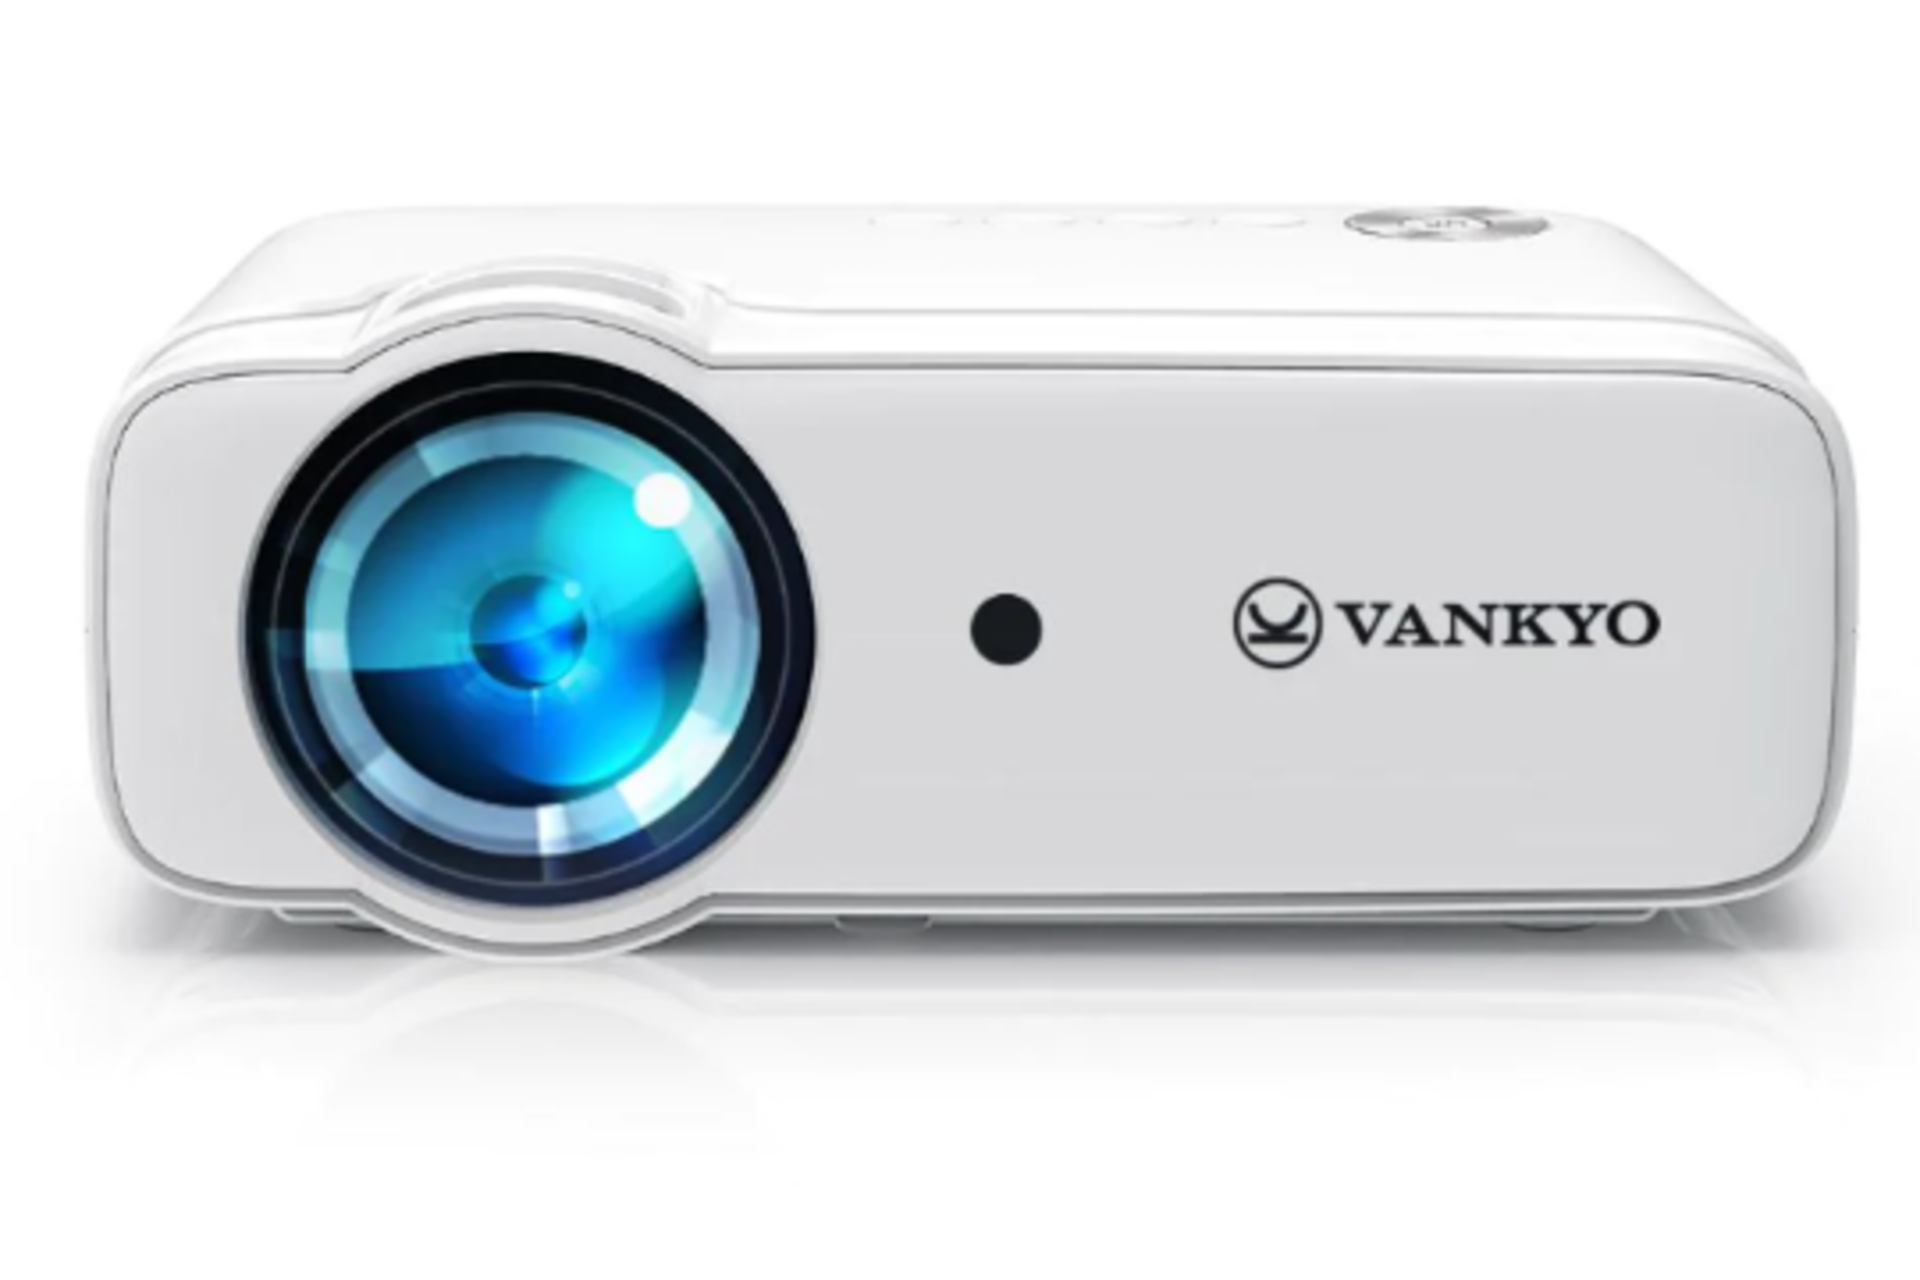 New Boxed VANKYO Leisure 430 Mini Projector for Movie, Outdoor Entertainment, Native 720P. 236” - Image 2 of 3